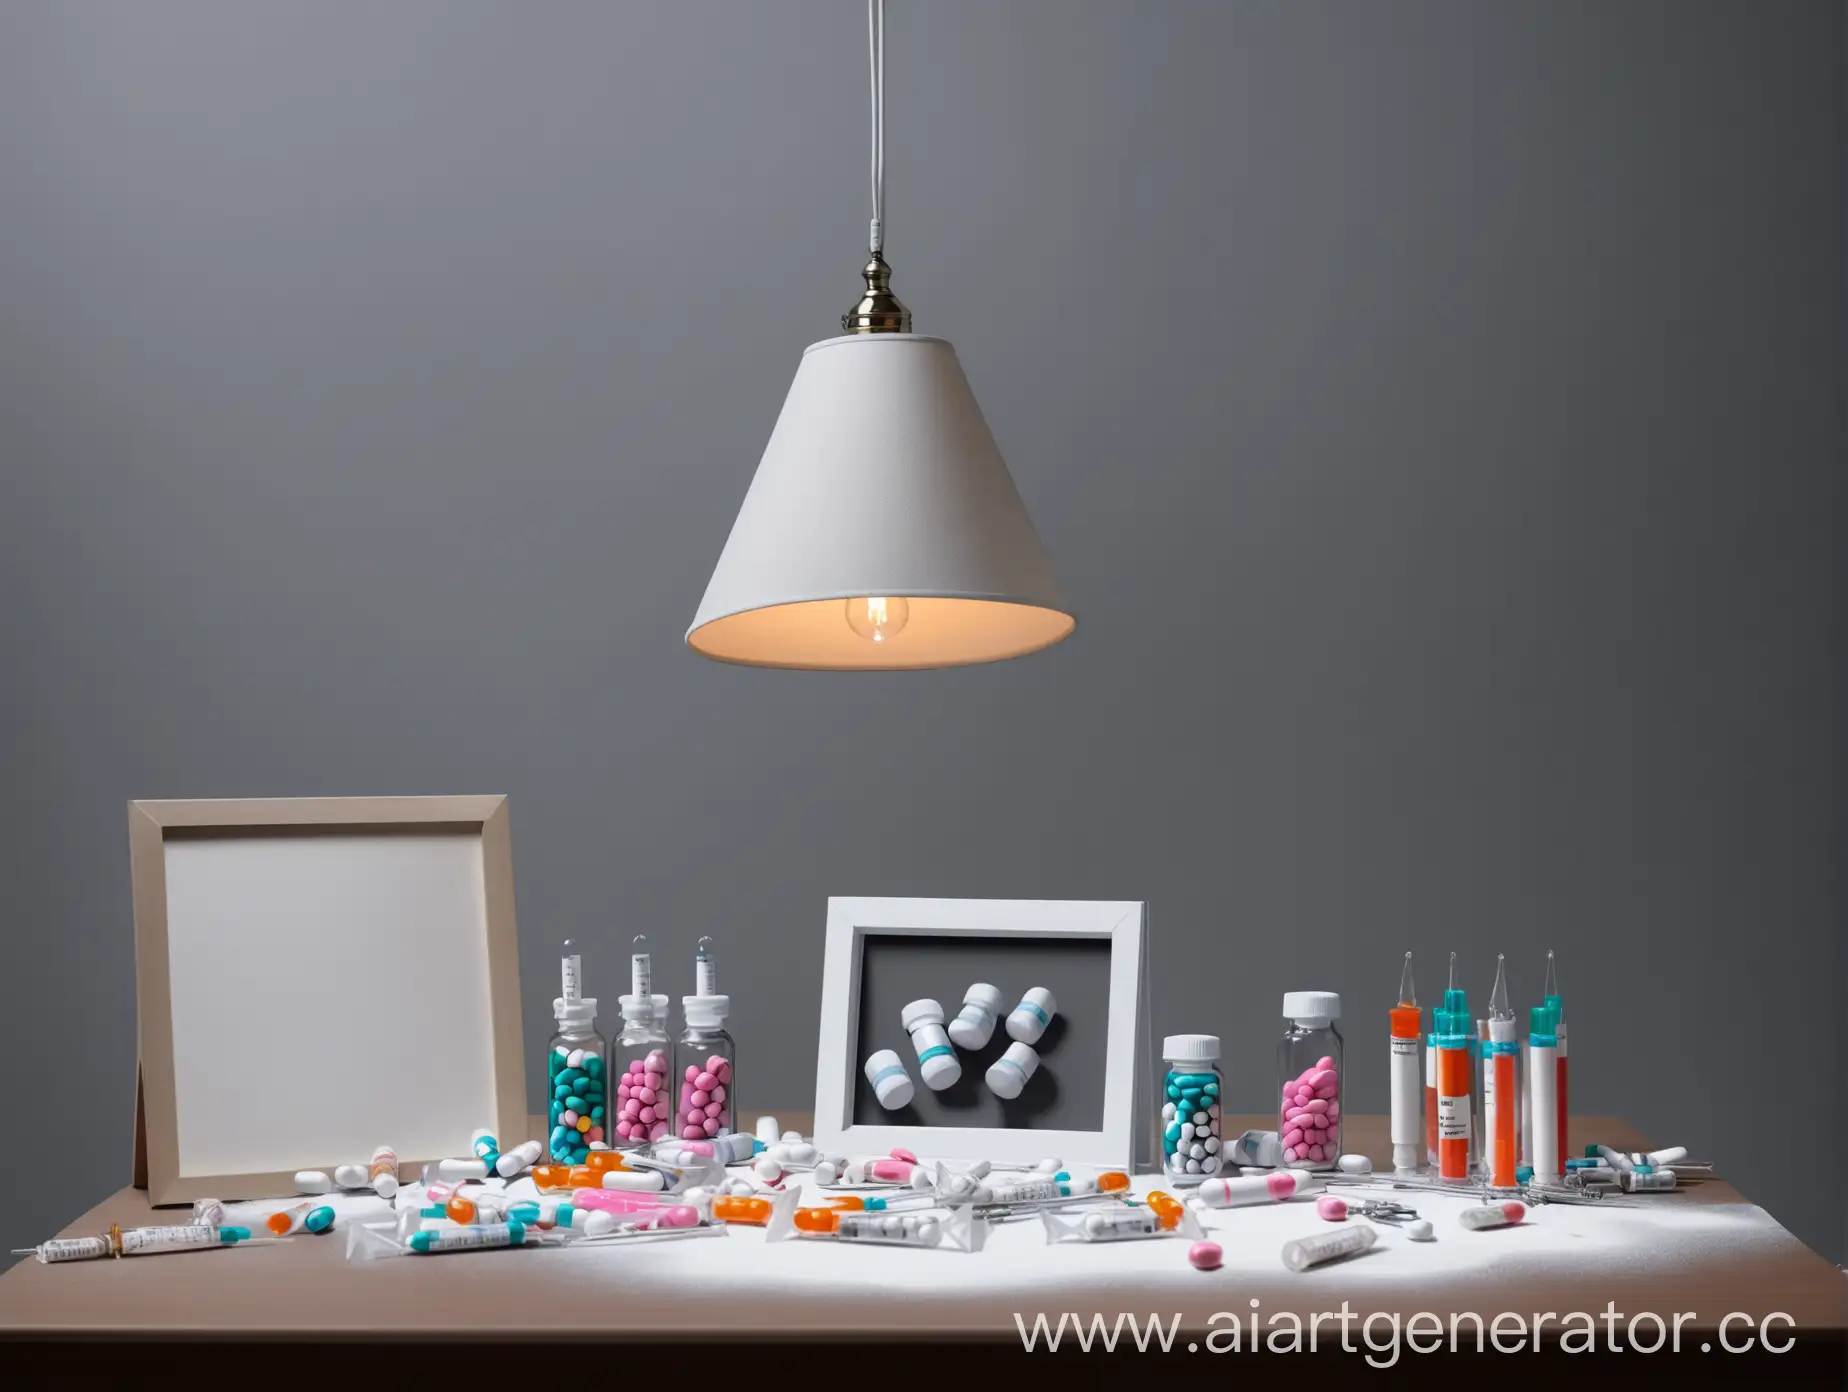 Medical-Table-with-Scattered-Pills-and-Syringes-Under-a-Hanging-Lamp